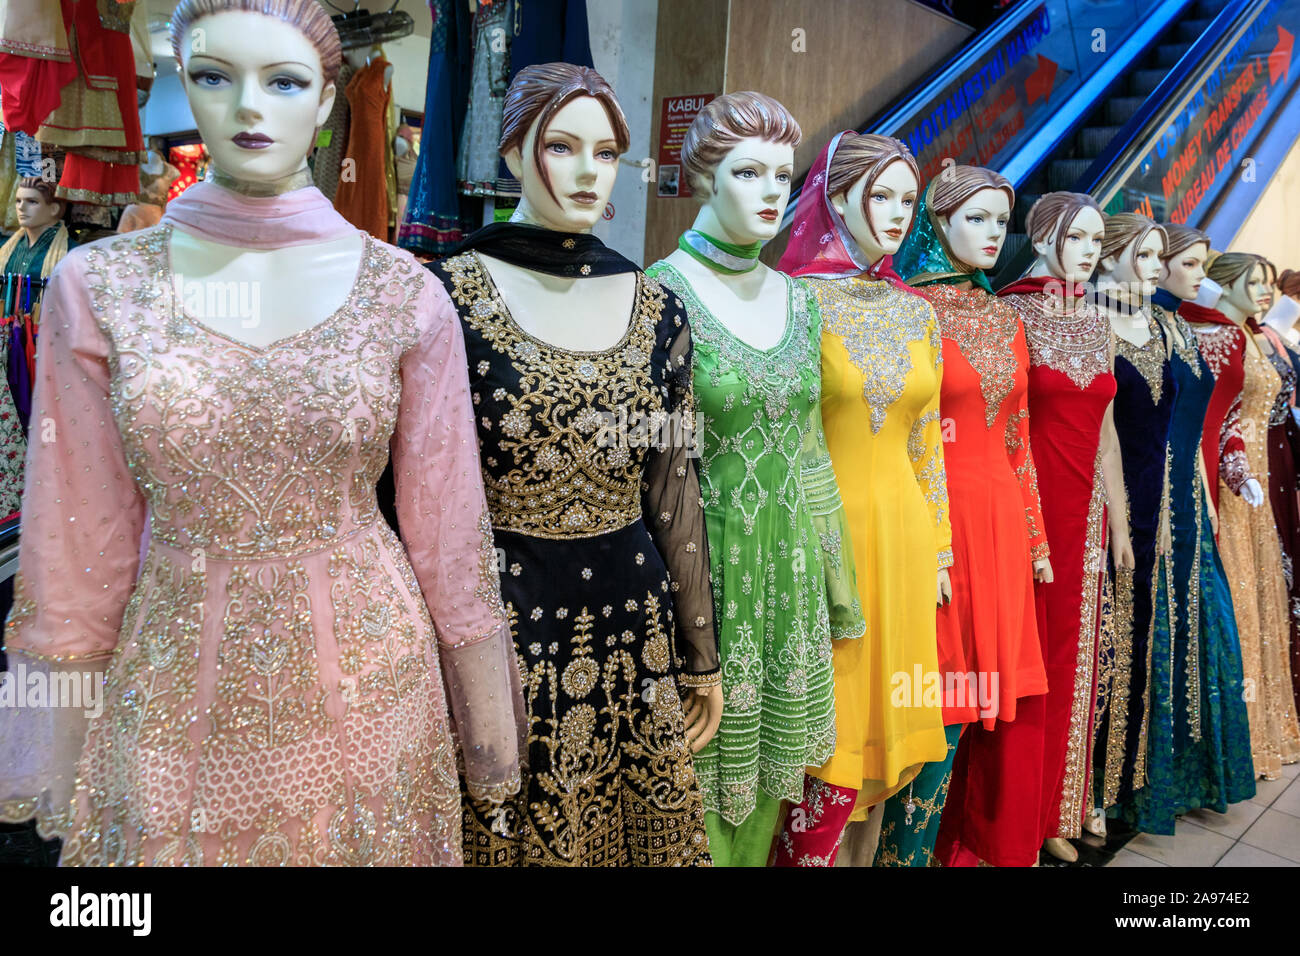 Punjabi, Indian and Asian dresses and saris on display, traditional, colourful clothes on mannequins in a shop in Southall, London, UK Stock Photo